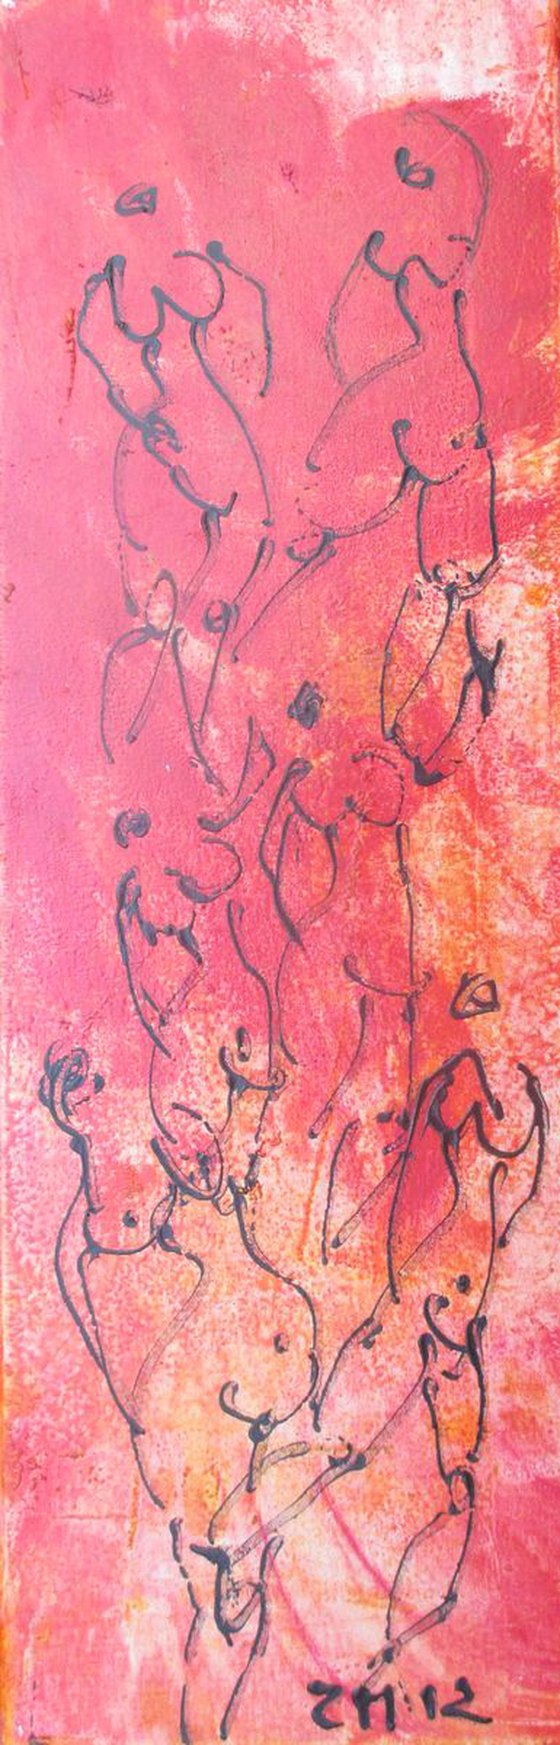 red dancing nudes 2 x 7,9 x 23,6